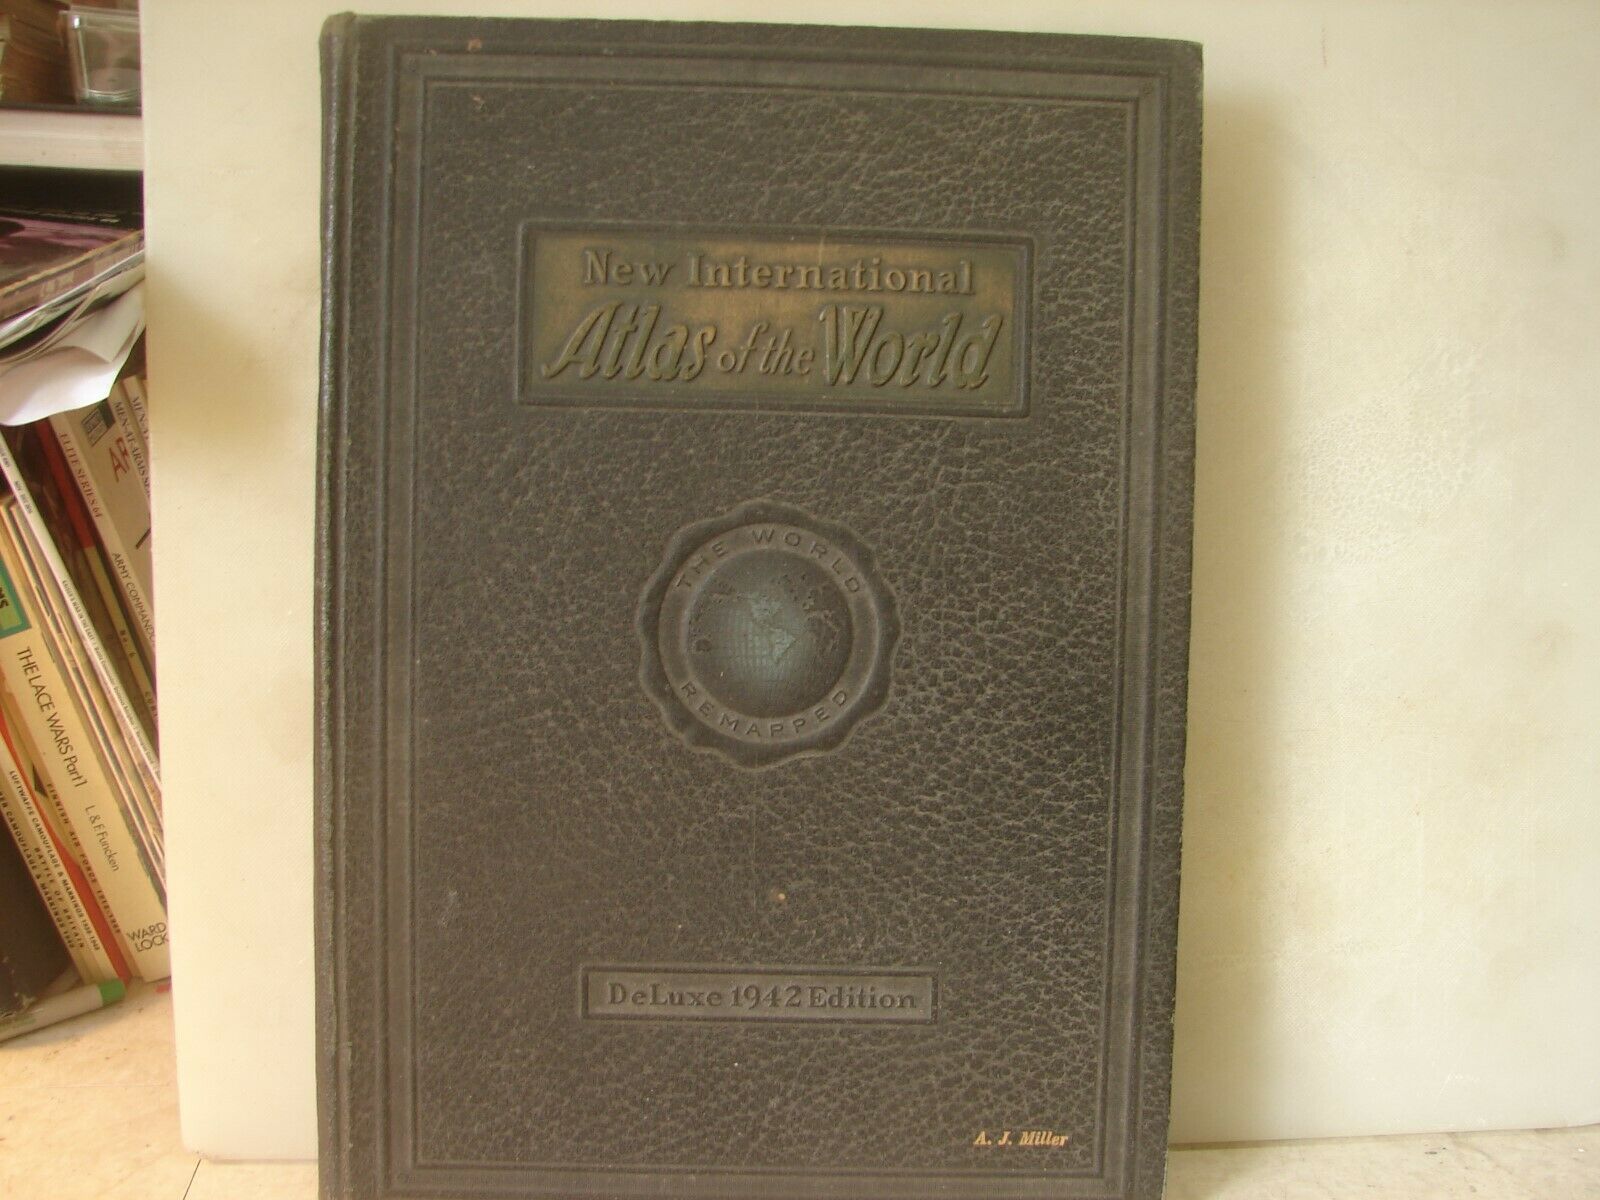 New International Atas of the World Deluxe 1942 Edition